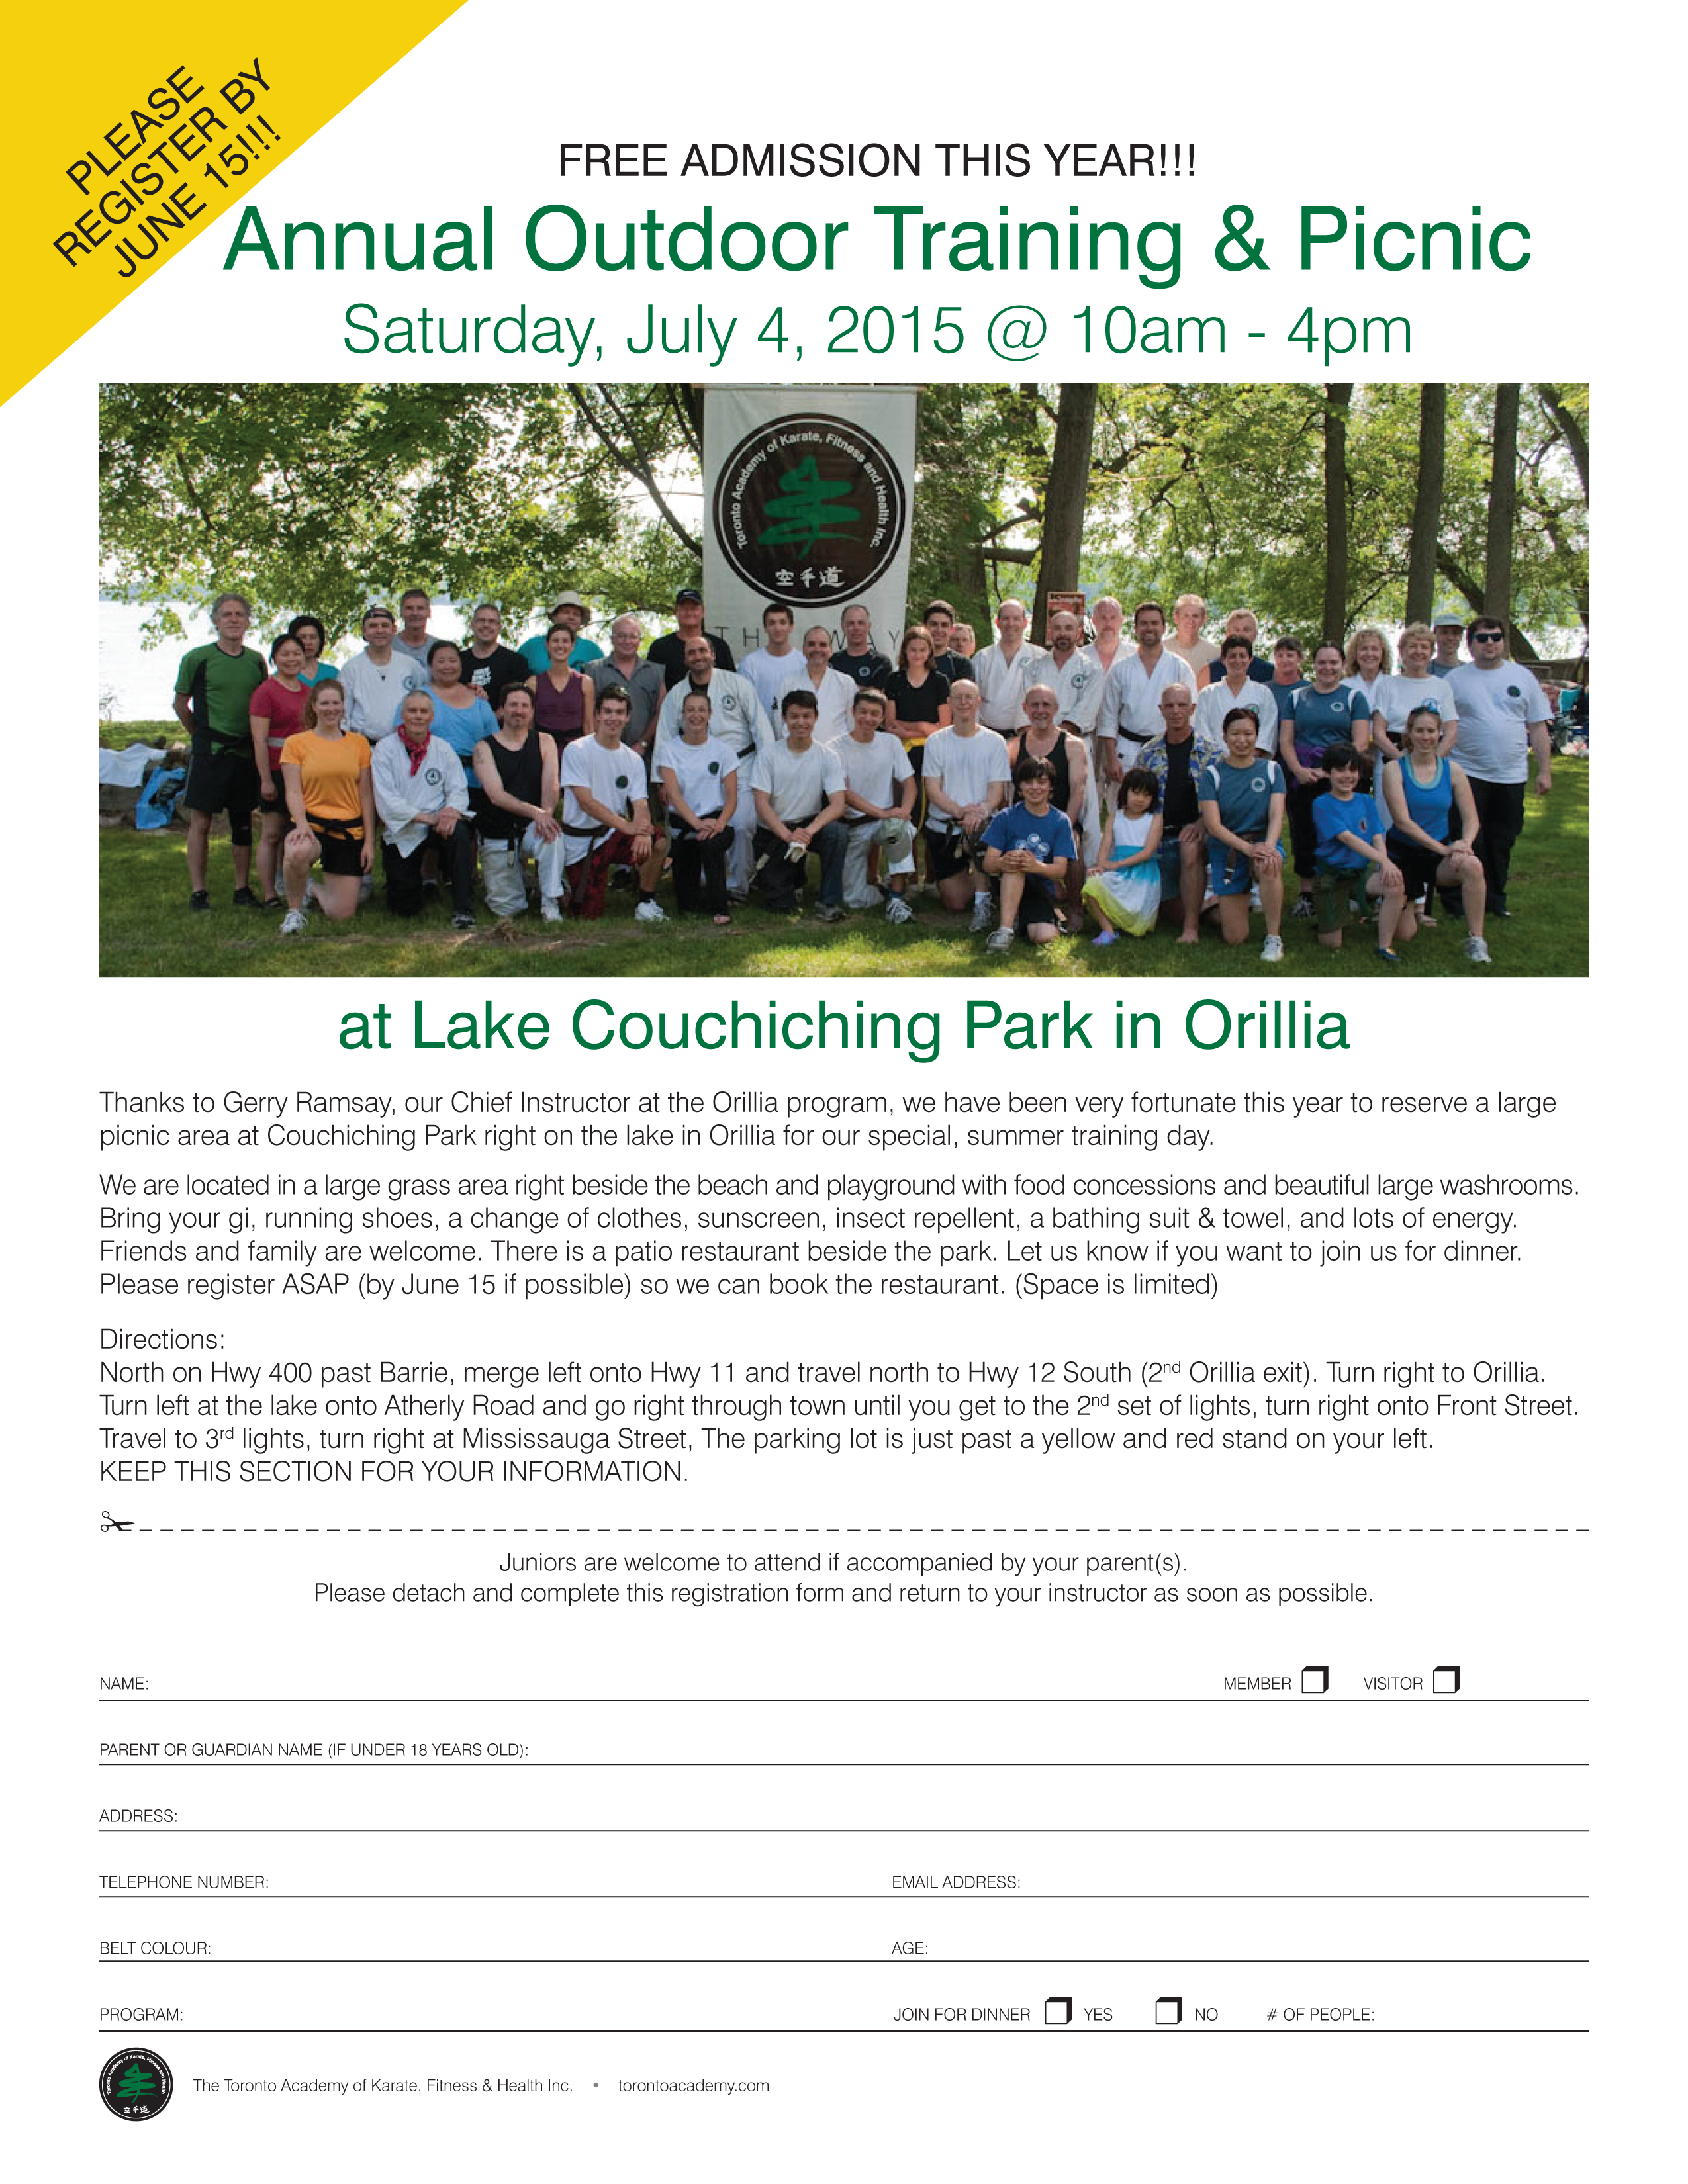 2015 Annual Outdoor Training & Picnic @ Lake Couchiching Park in Orillia